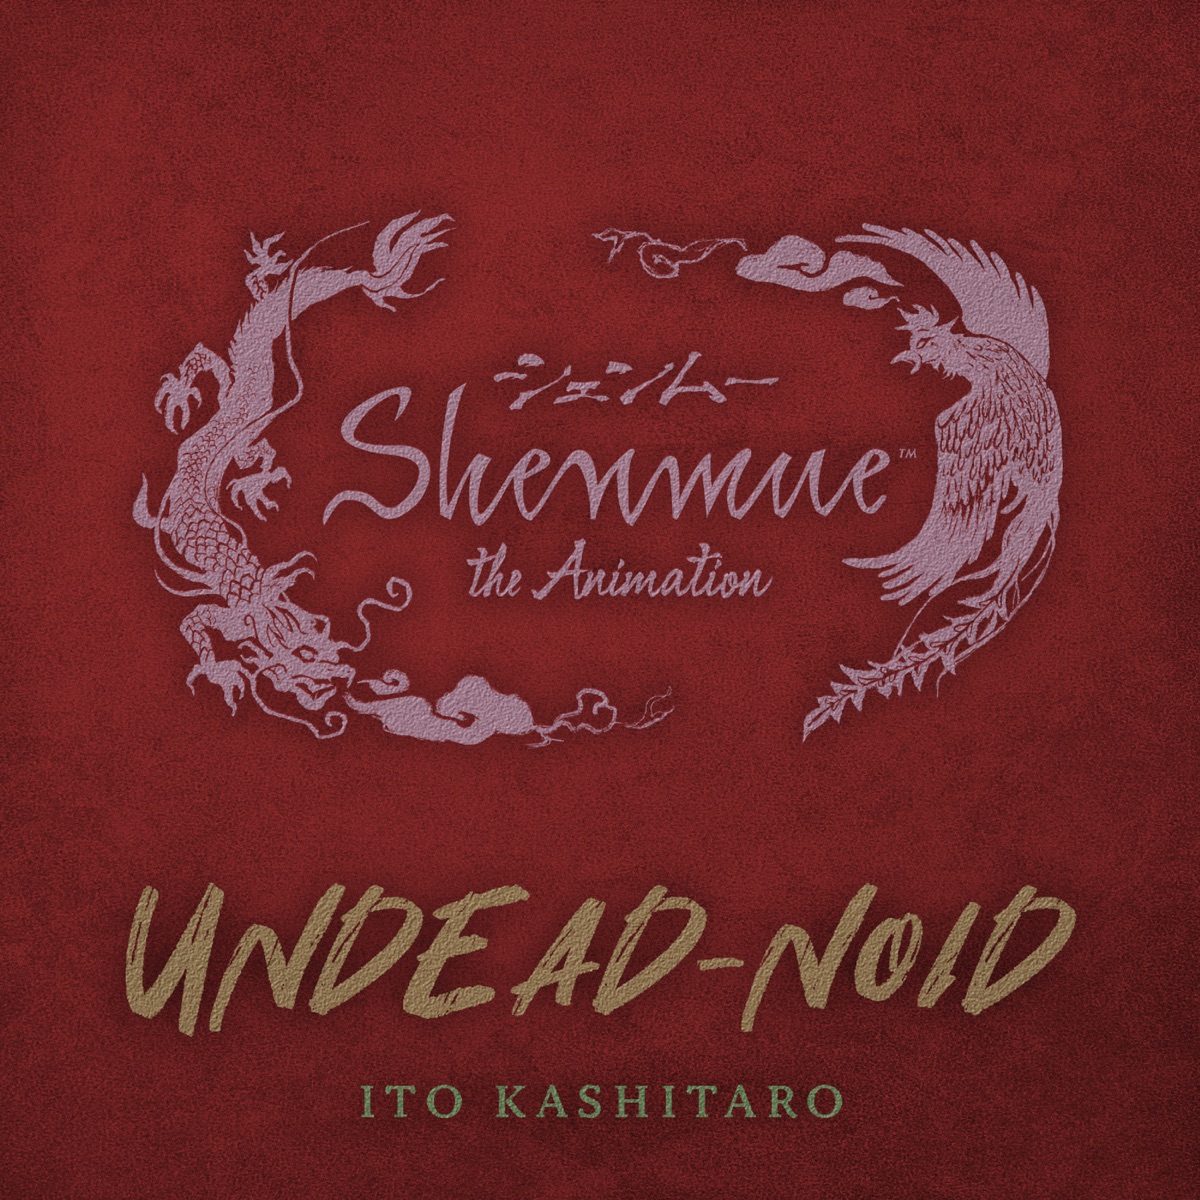 Cover for『Kashitaro Ito - UNDEAD-NOID』from the release『UNDEAD-NOID』